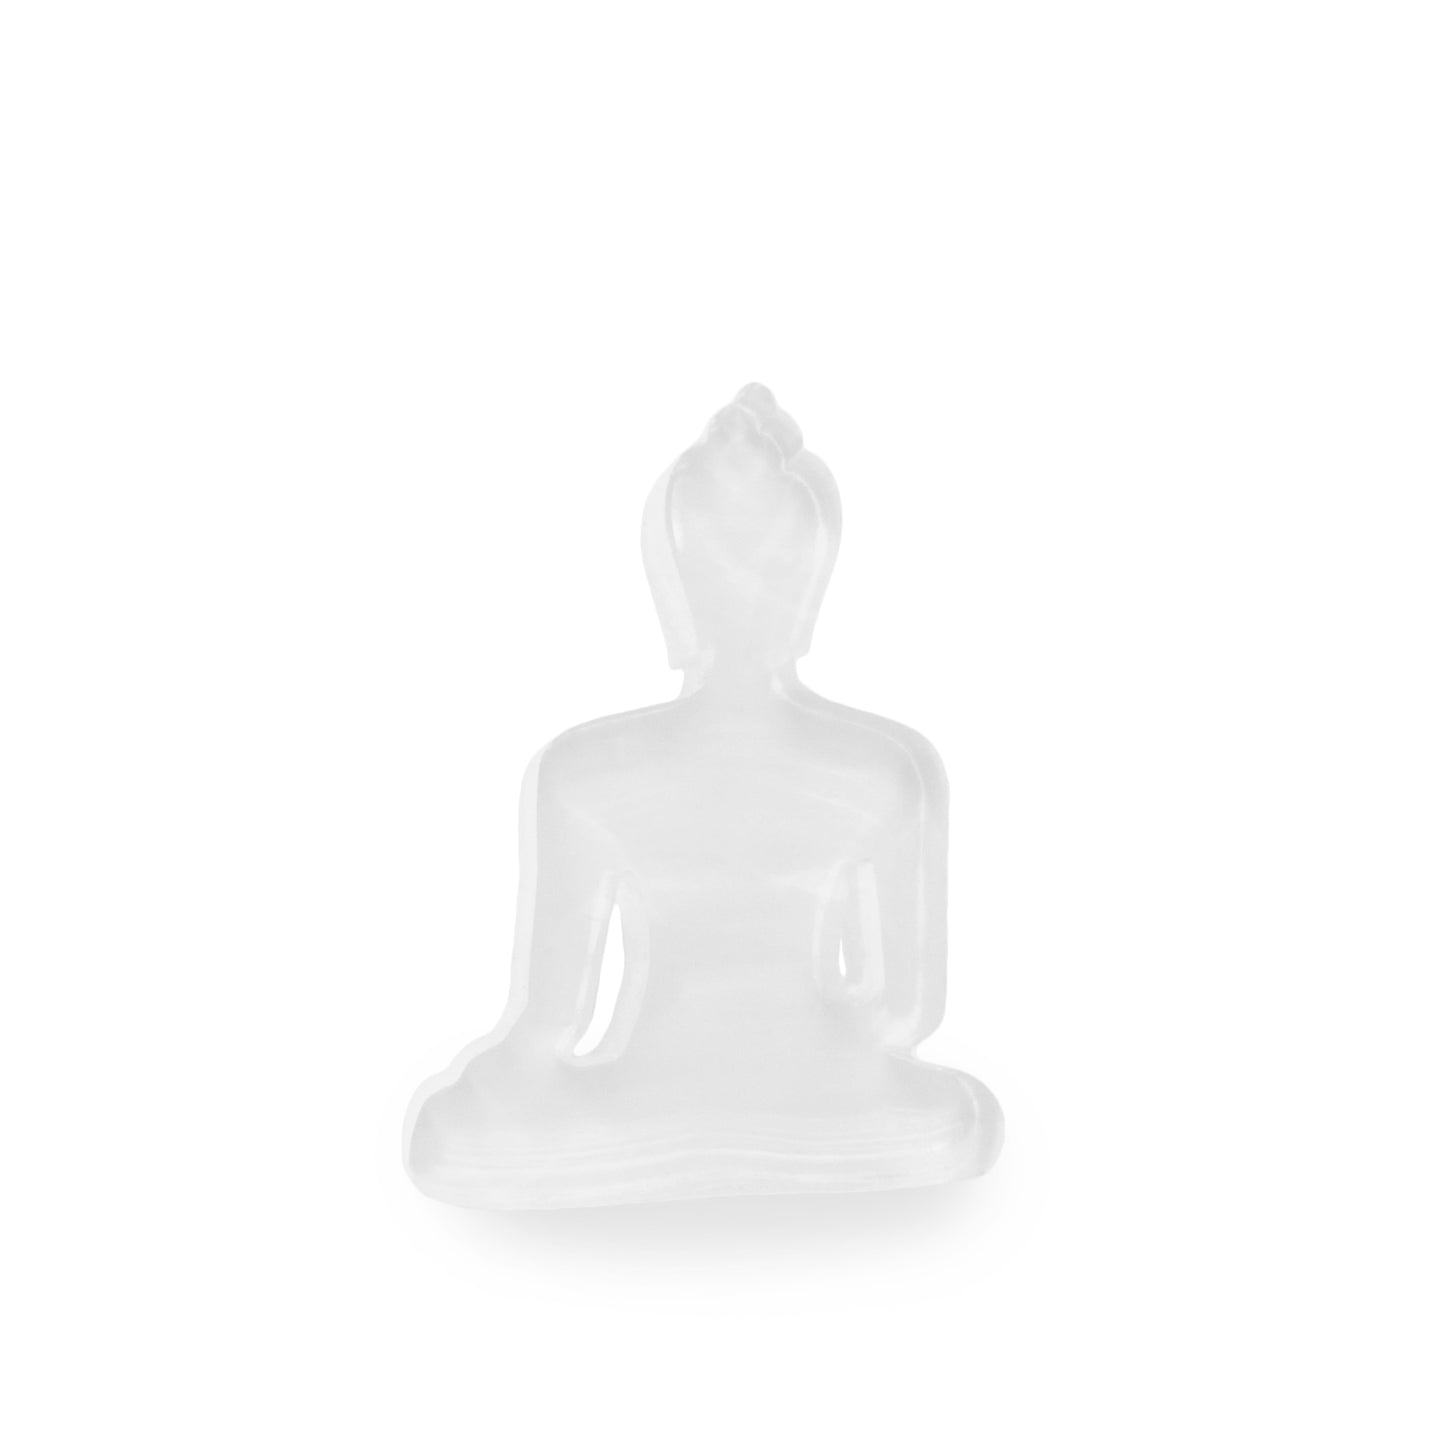 Buddha statue set of 3 - Green, White and Turquoise